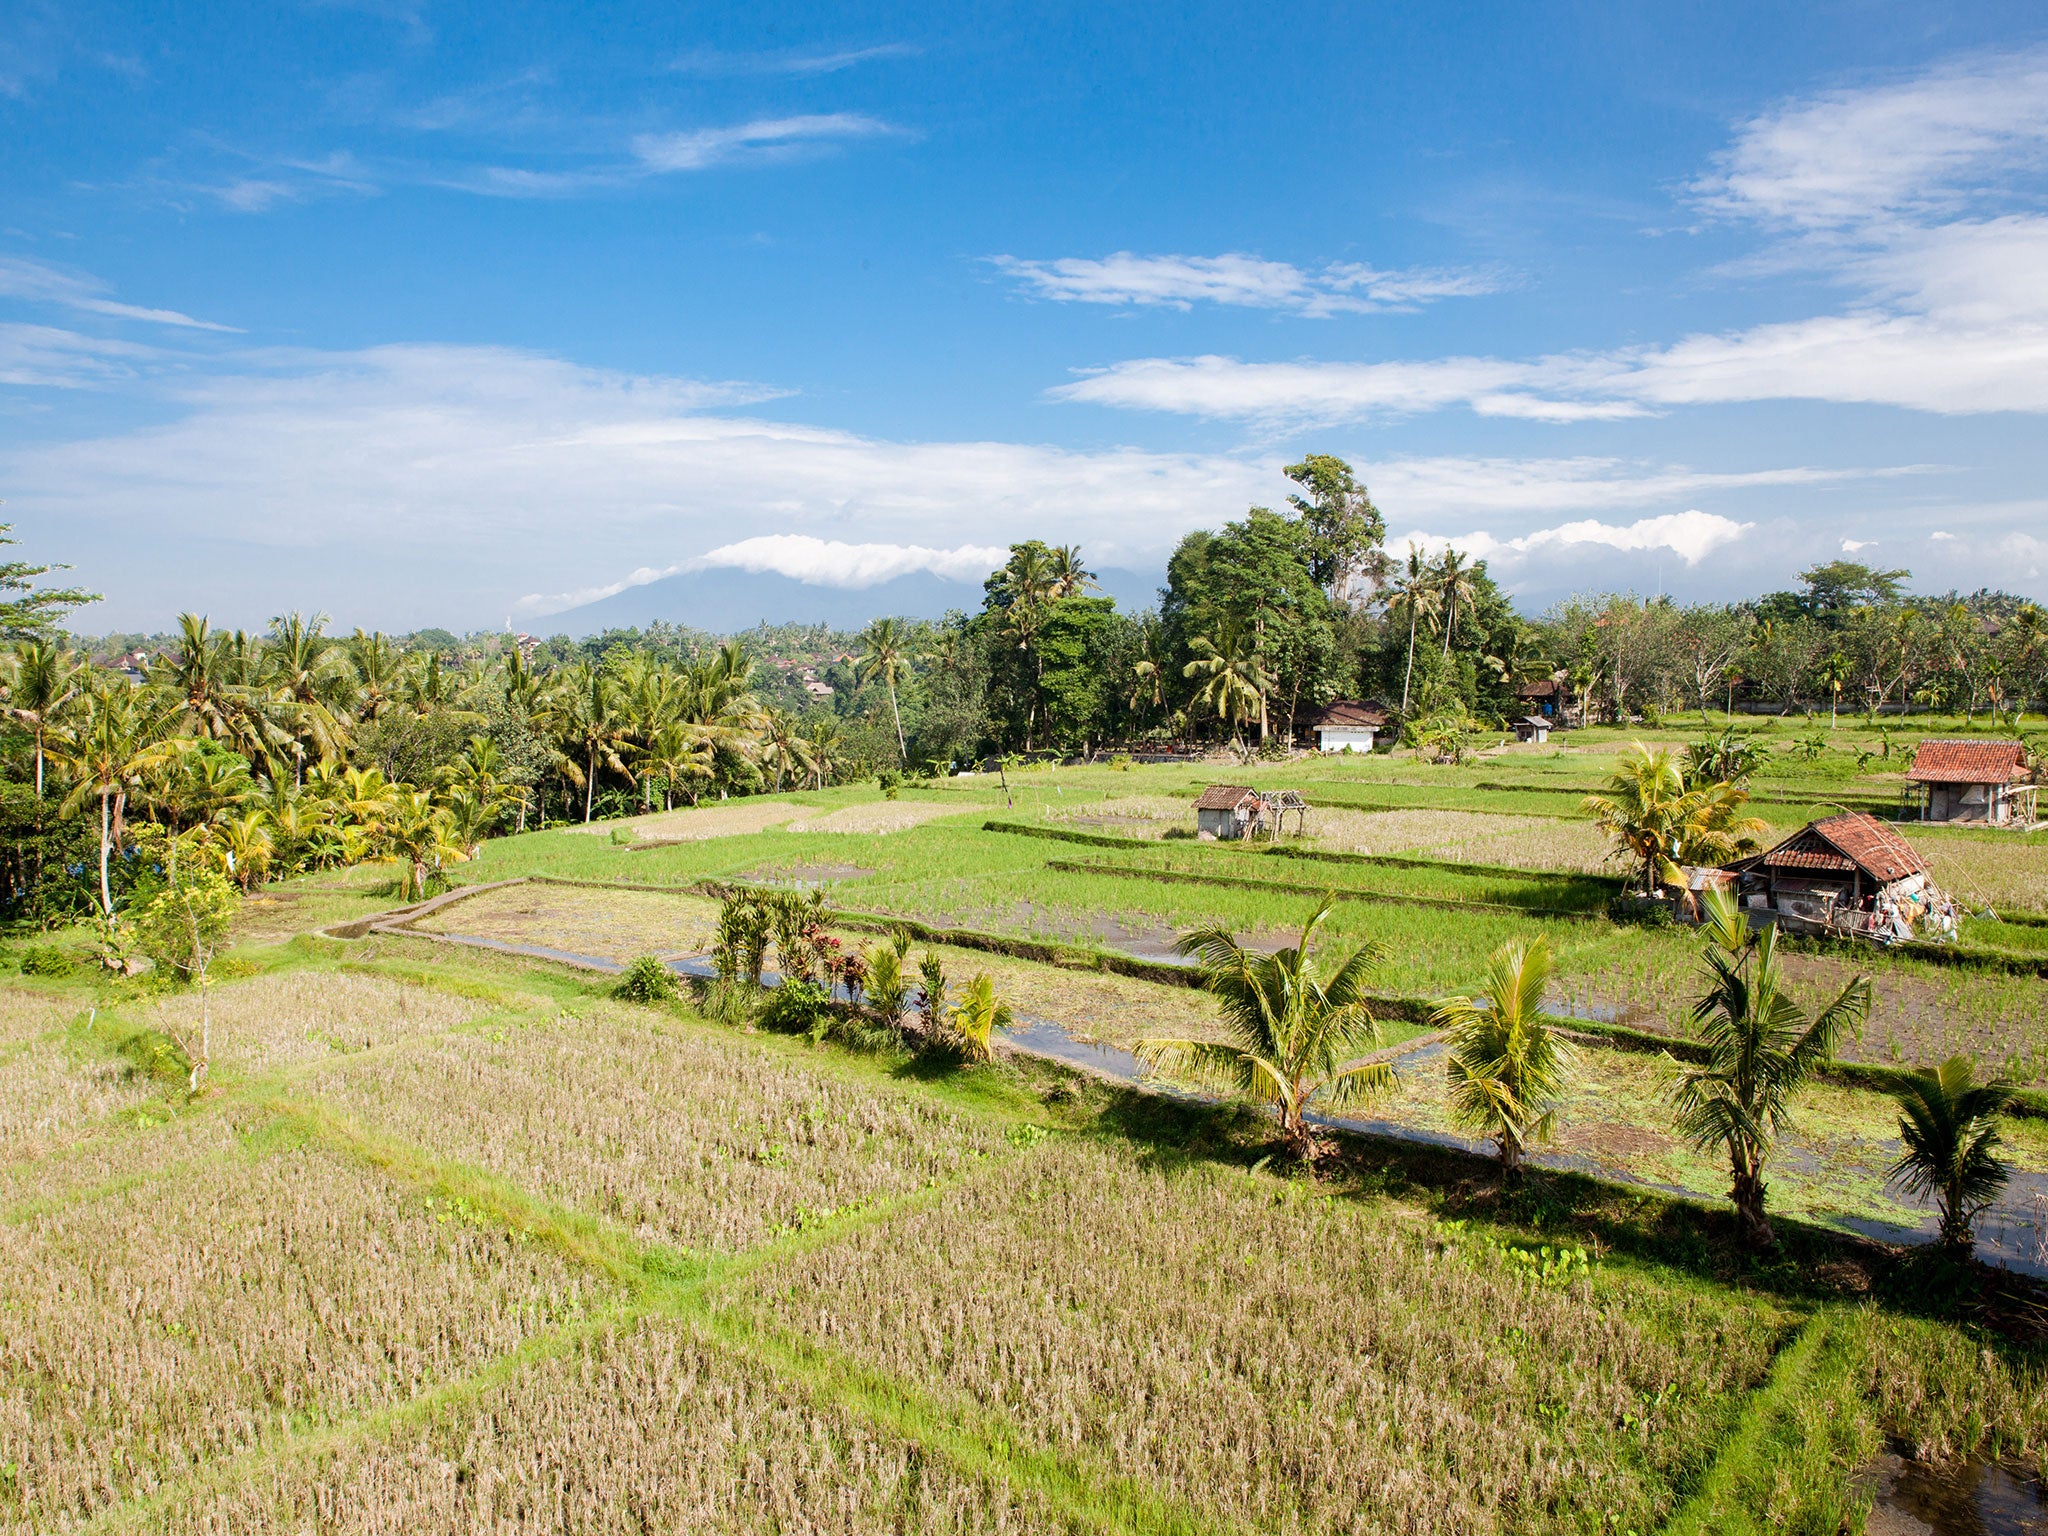 Police in Indonesia are investigating the murder of a British man found with his throat cut in a rice field on the island of Bali